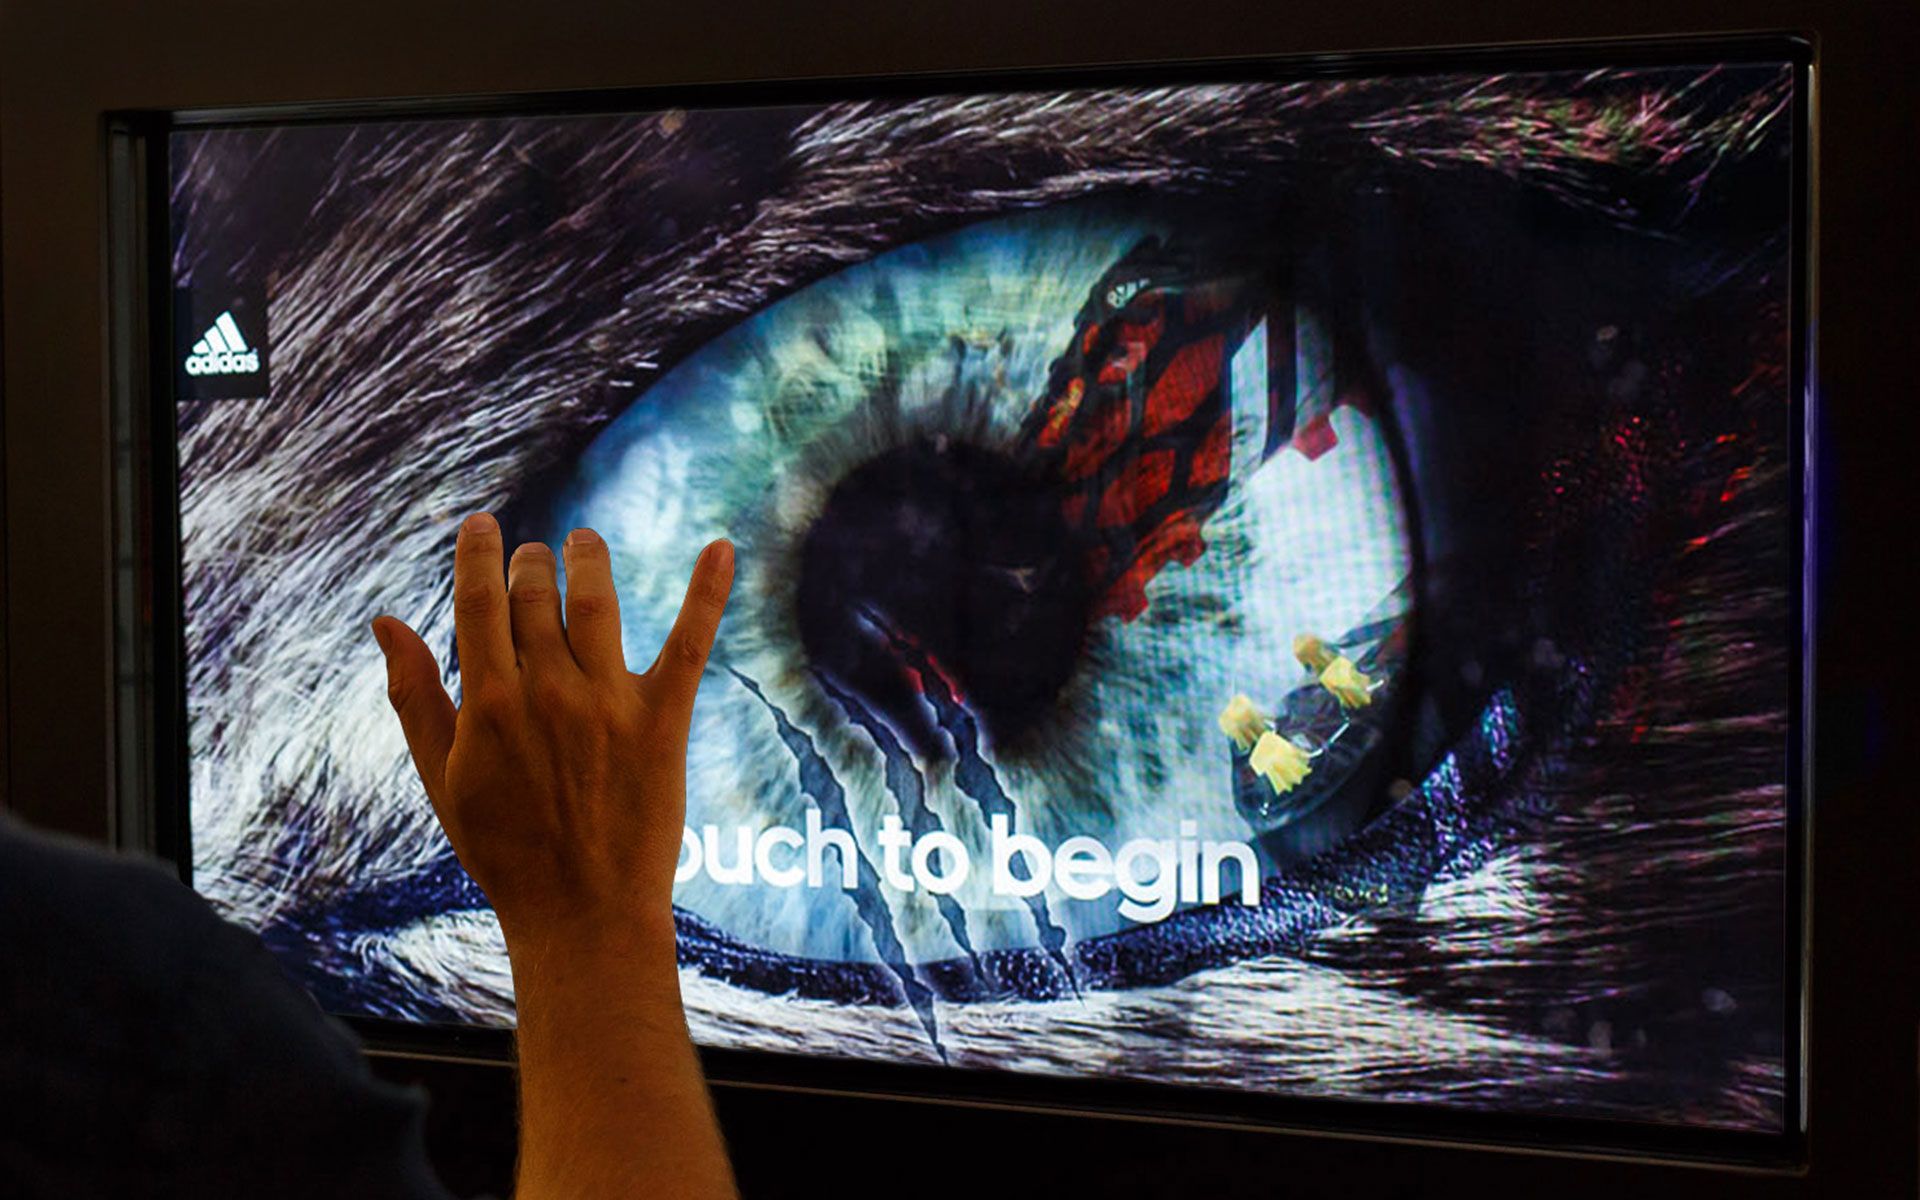 Hand touching a touch screen showing a close up of a wolf’s eye that reads “Touch to begin”